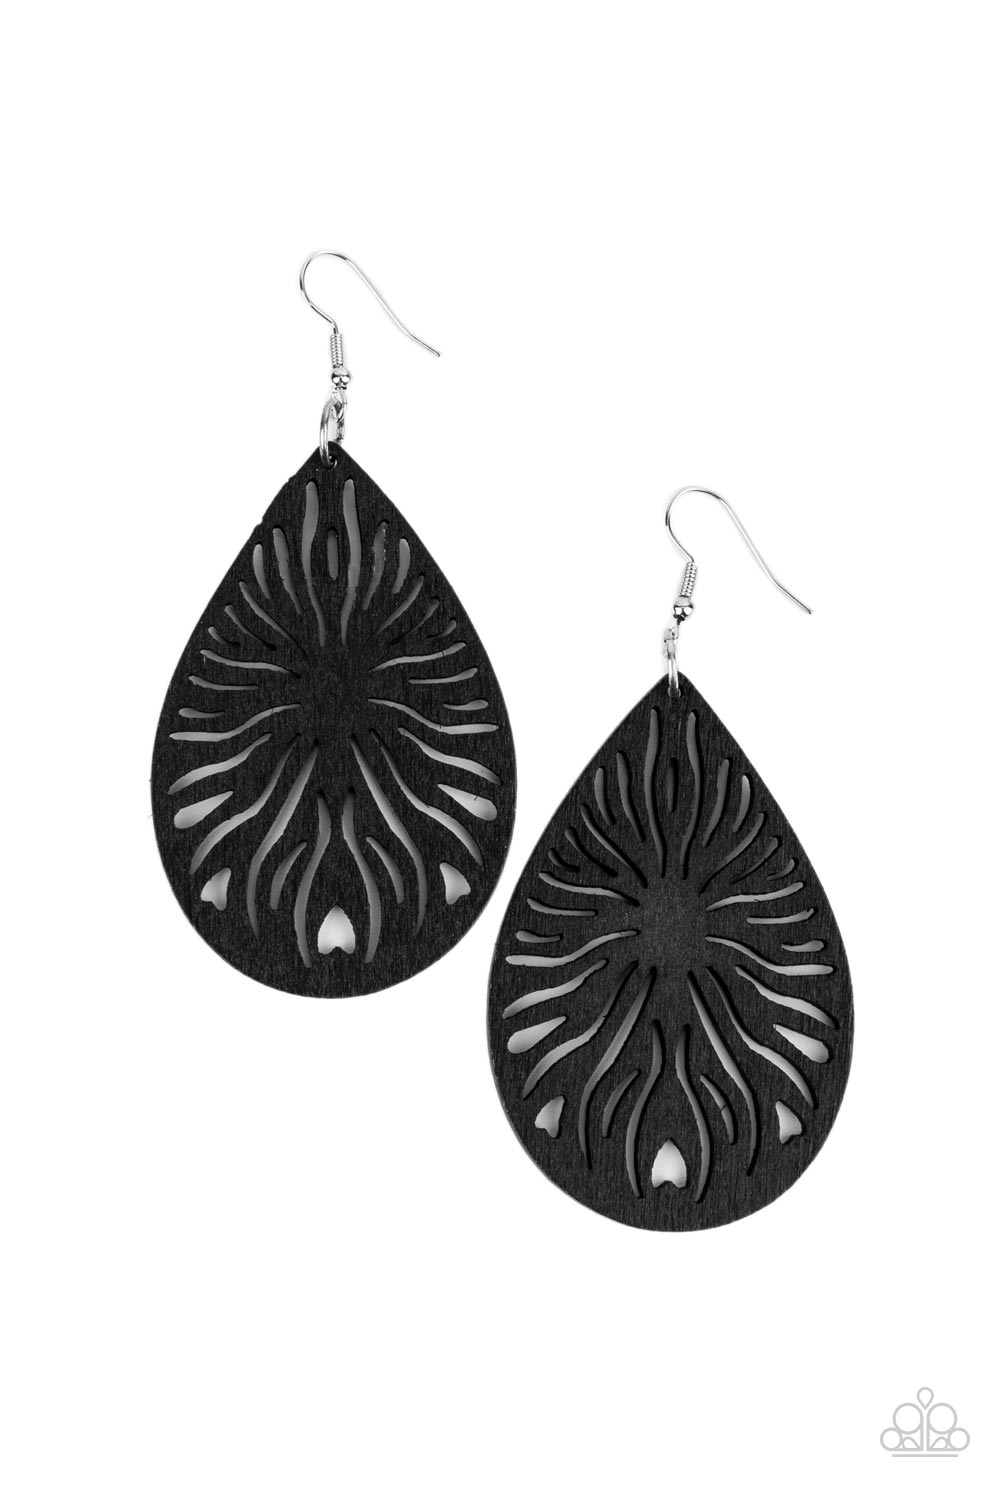 Sunny Incantations Black Wood Earrings - Paparazzi Accessories- lightbox - CarasShop.com - $5 Jewelry by Cara Jewels